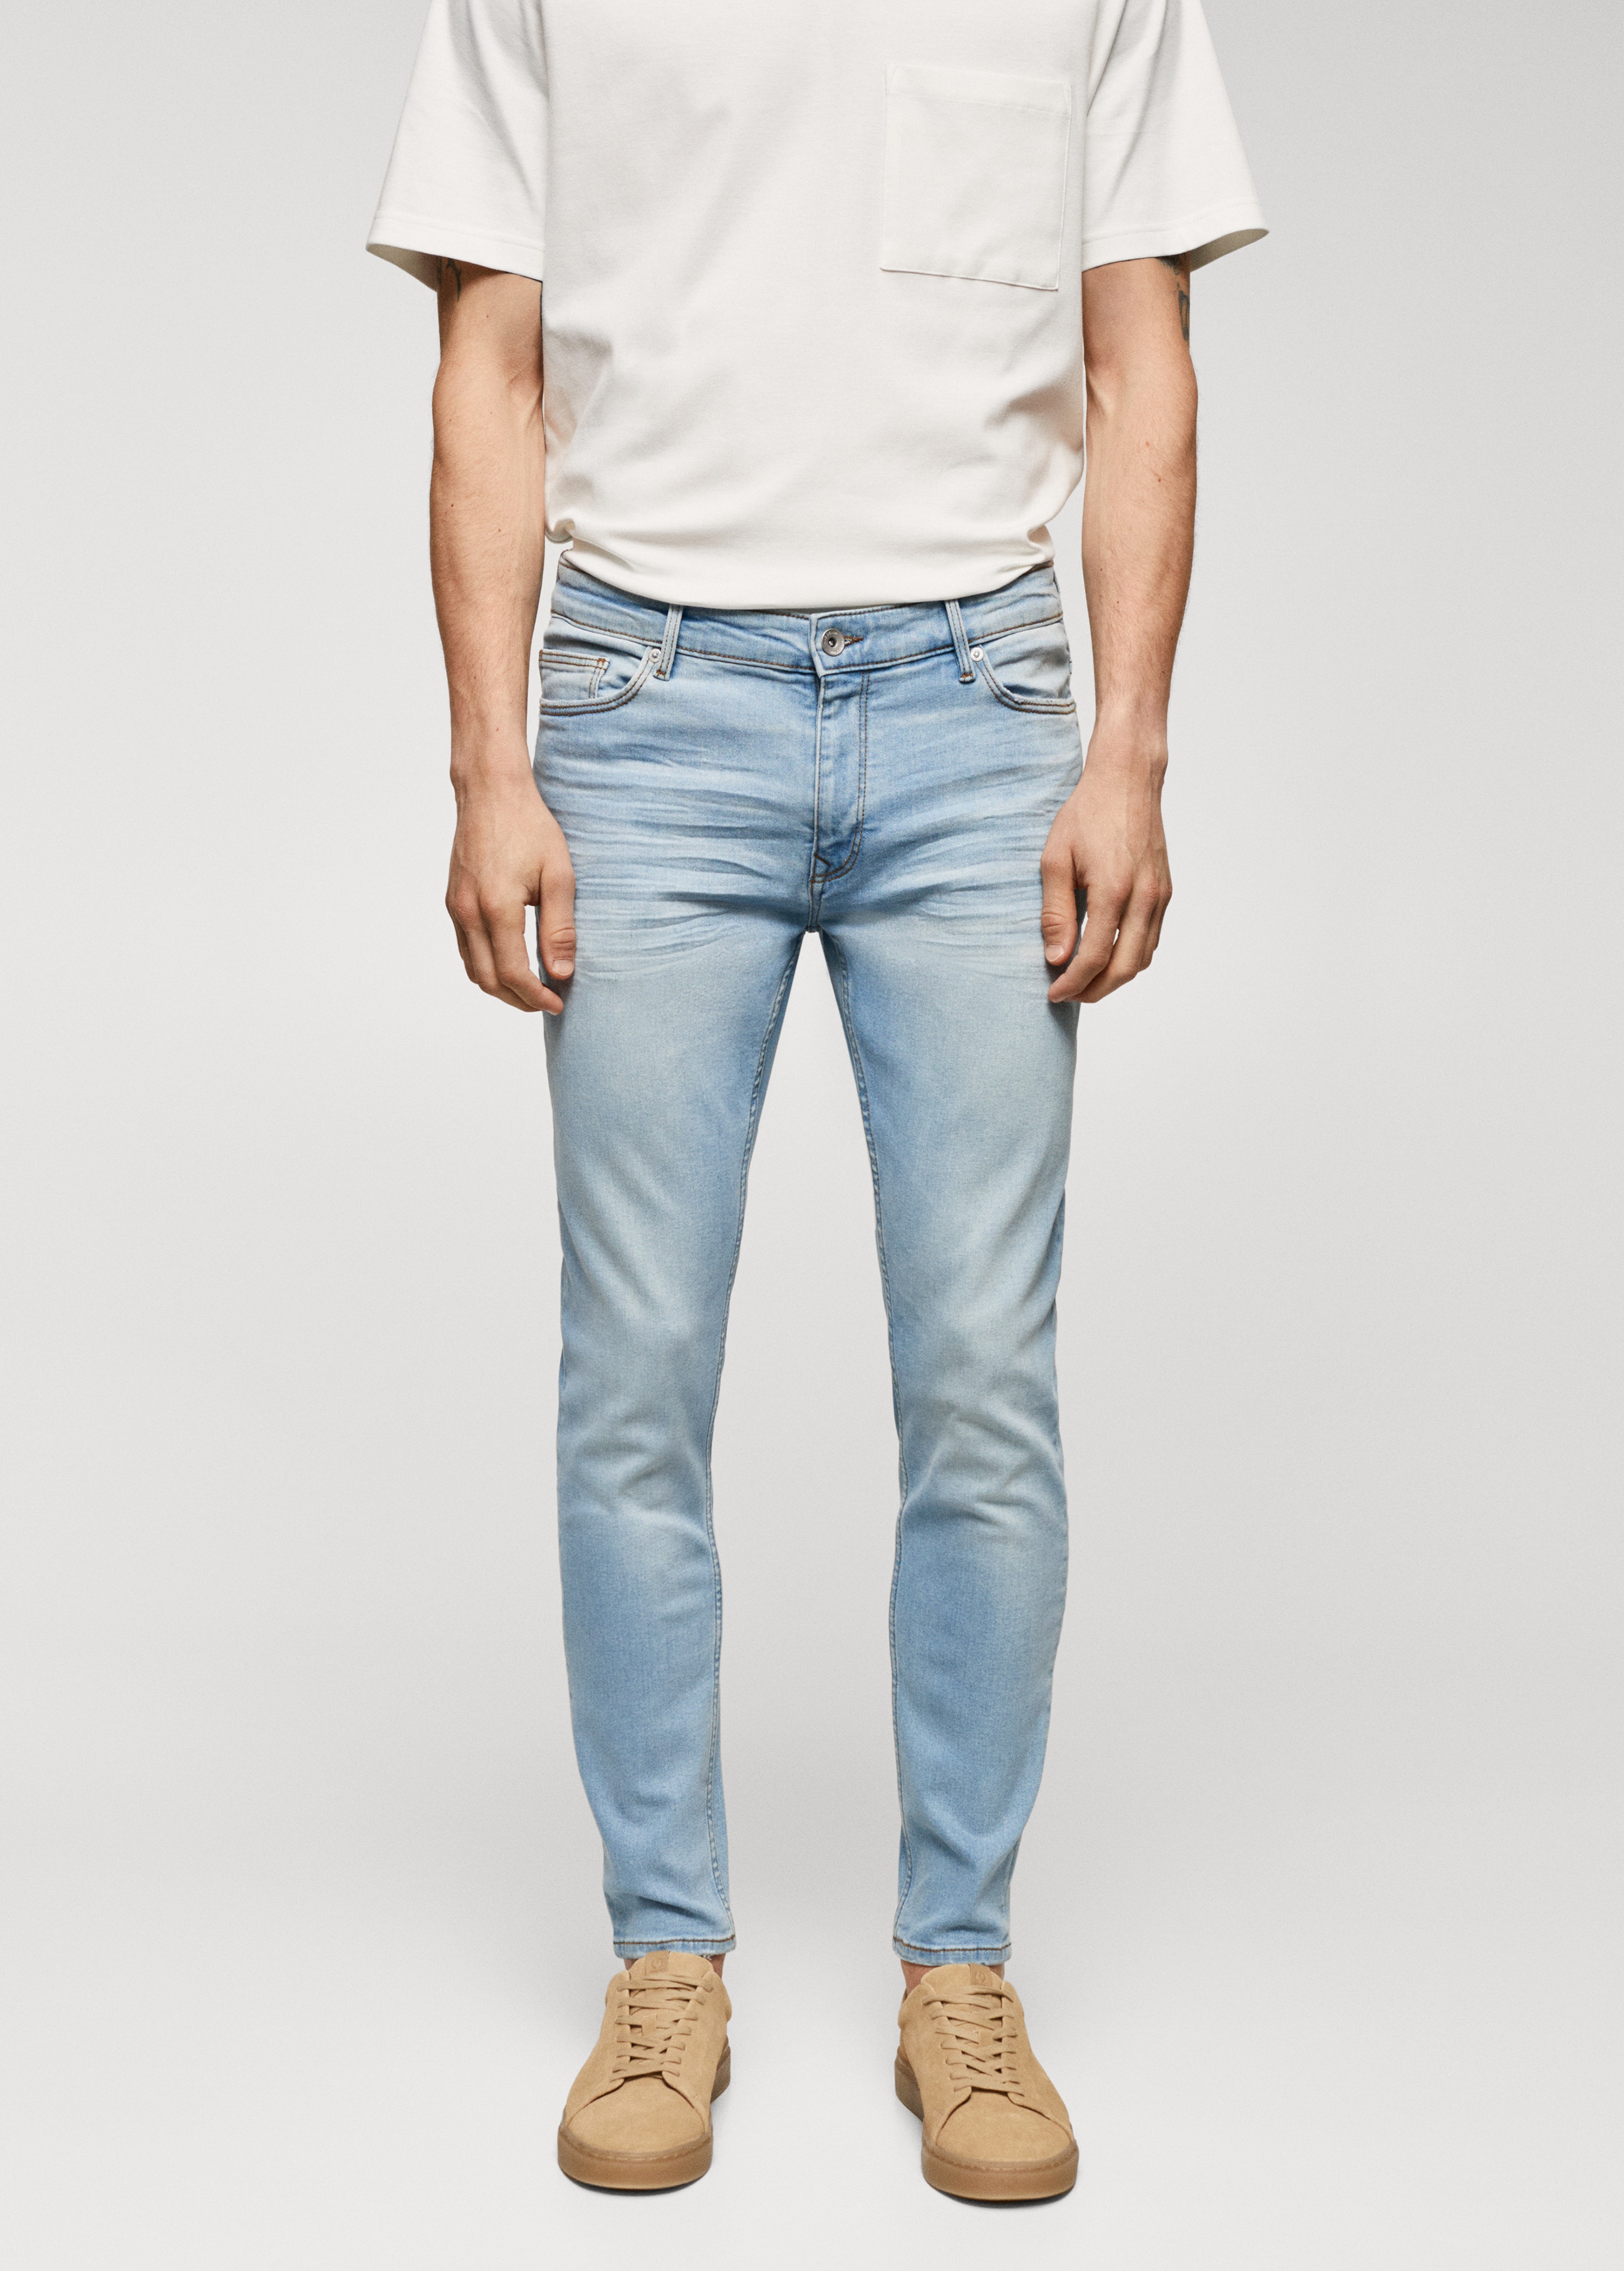 Jeans Jude skinny-fit - Piano medio